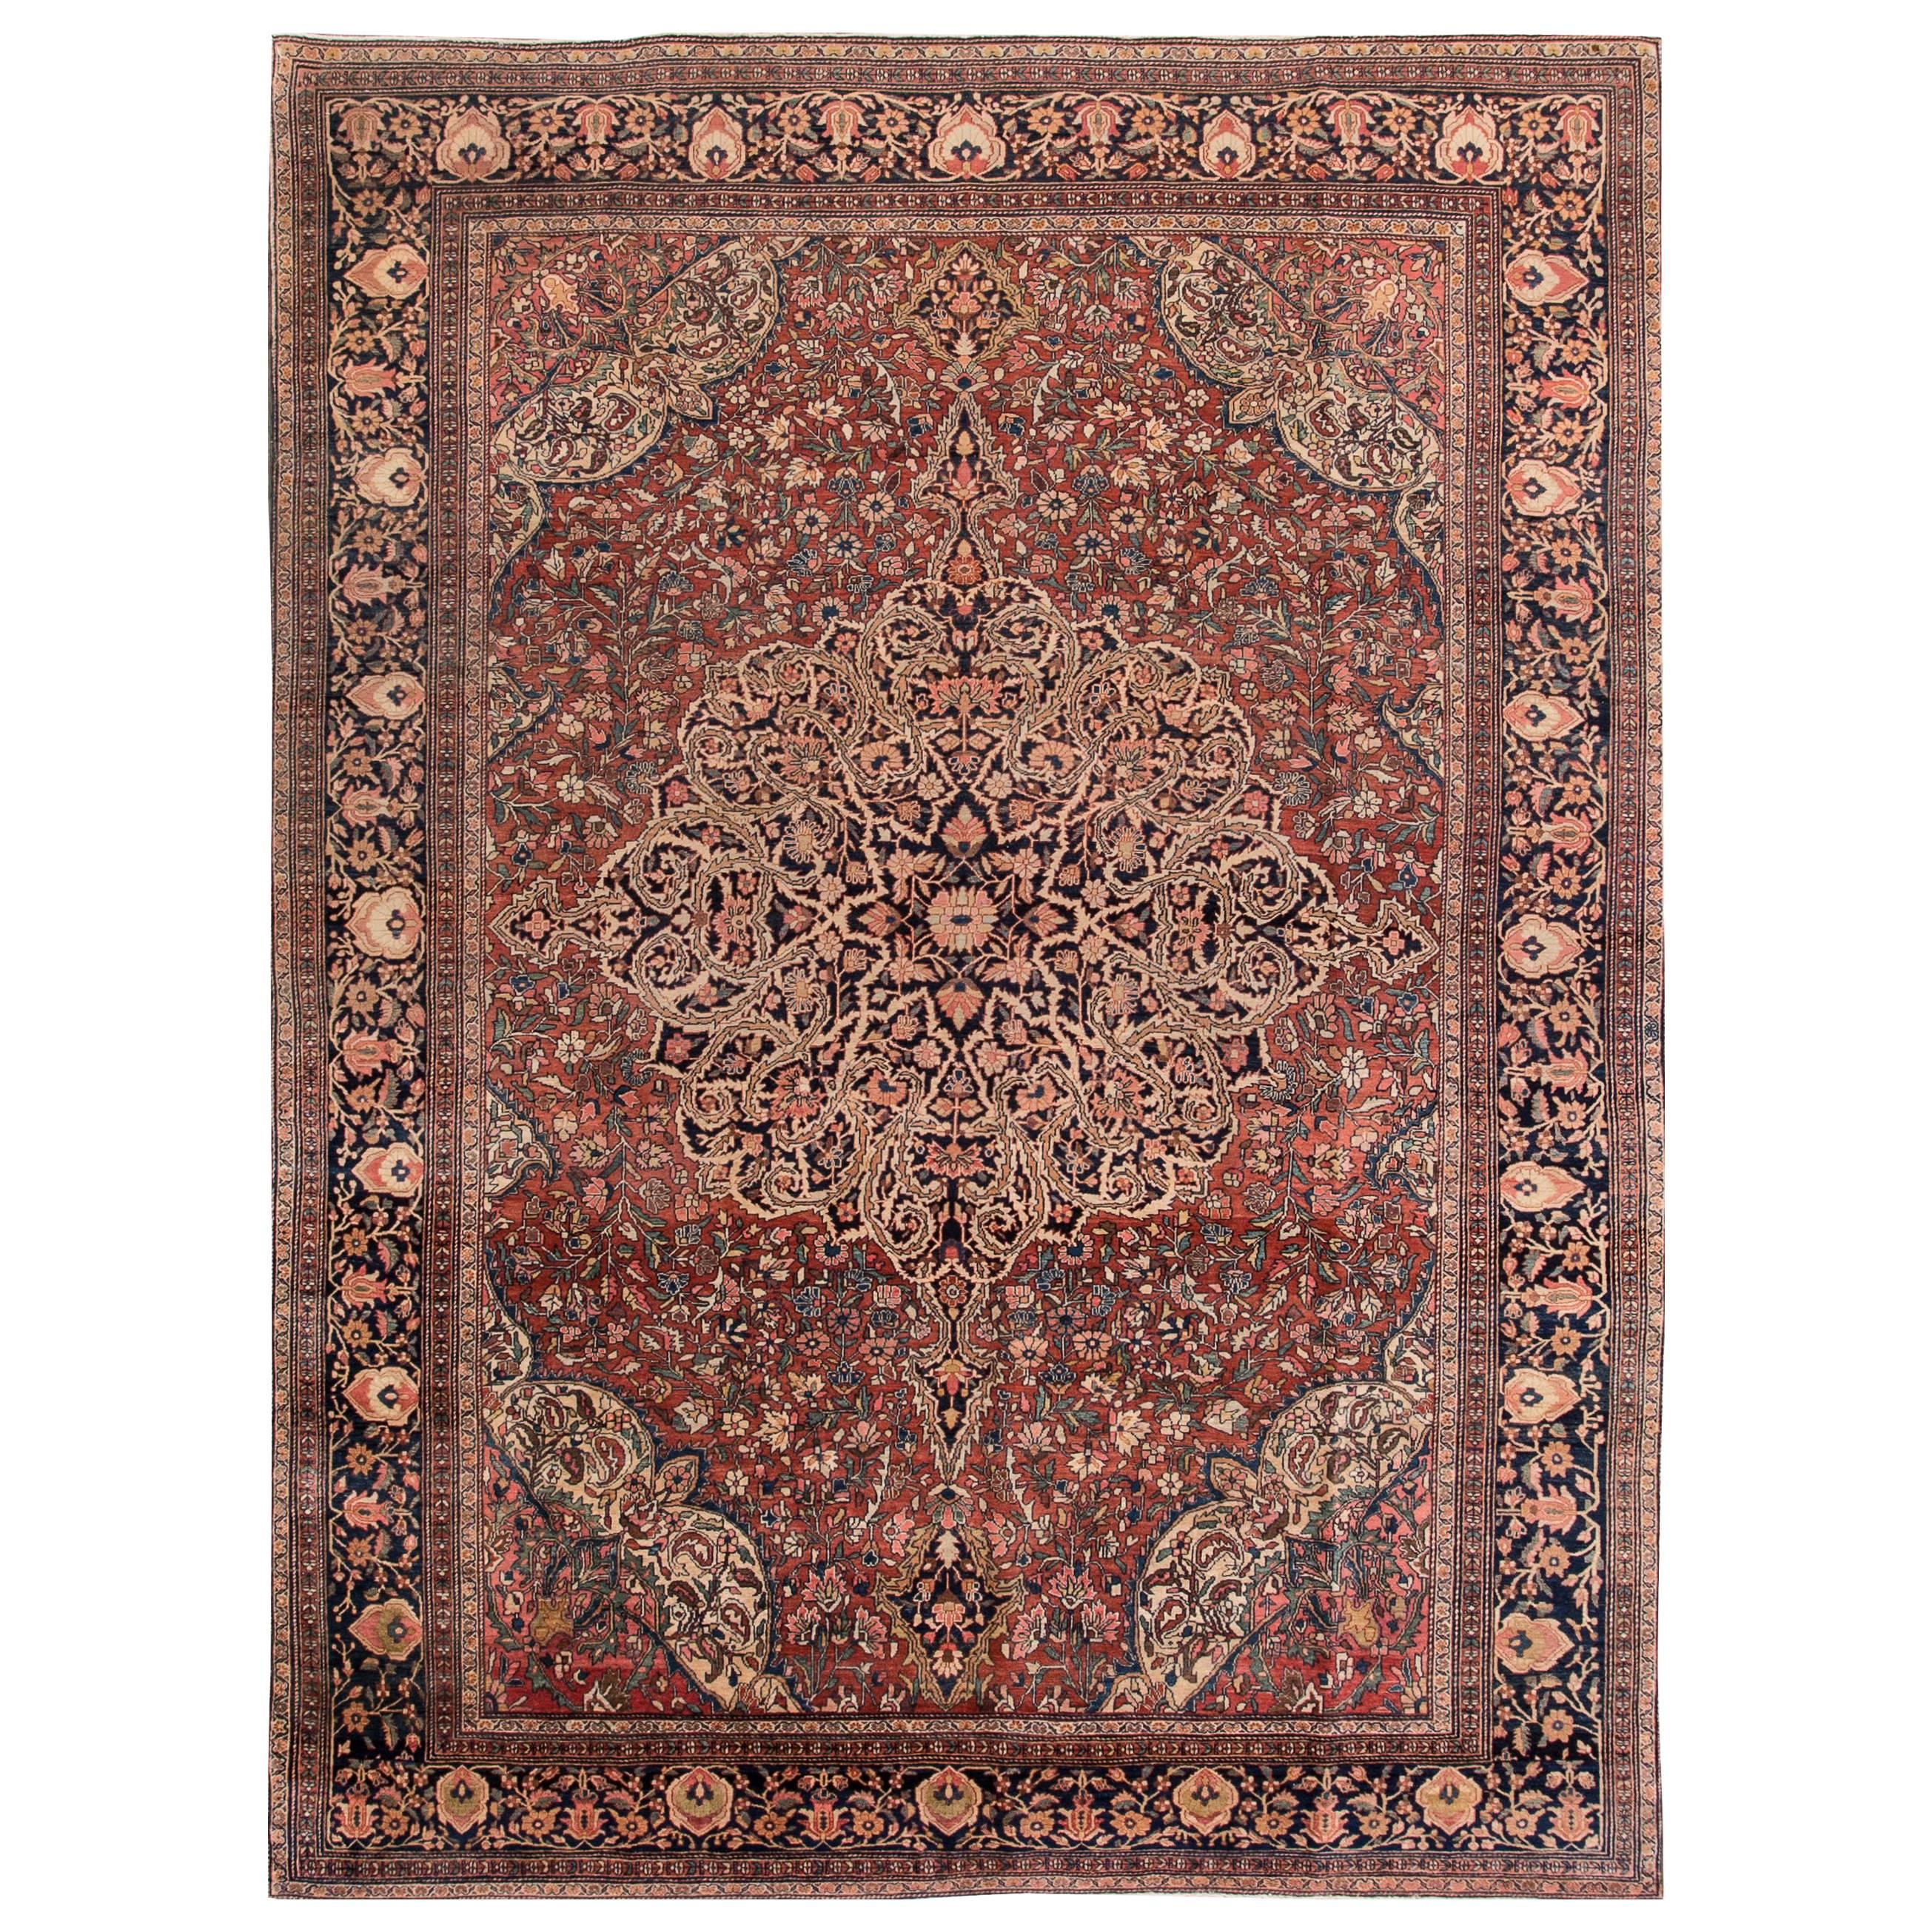 Simply Beautiful Antique Farahan Rug For Sale